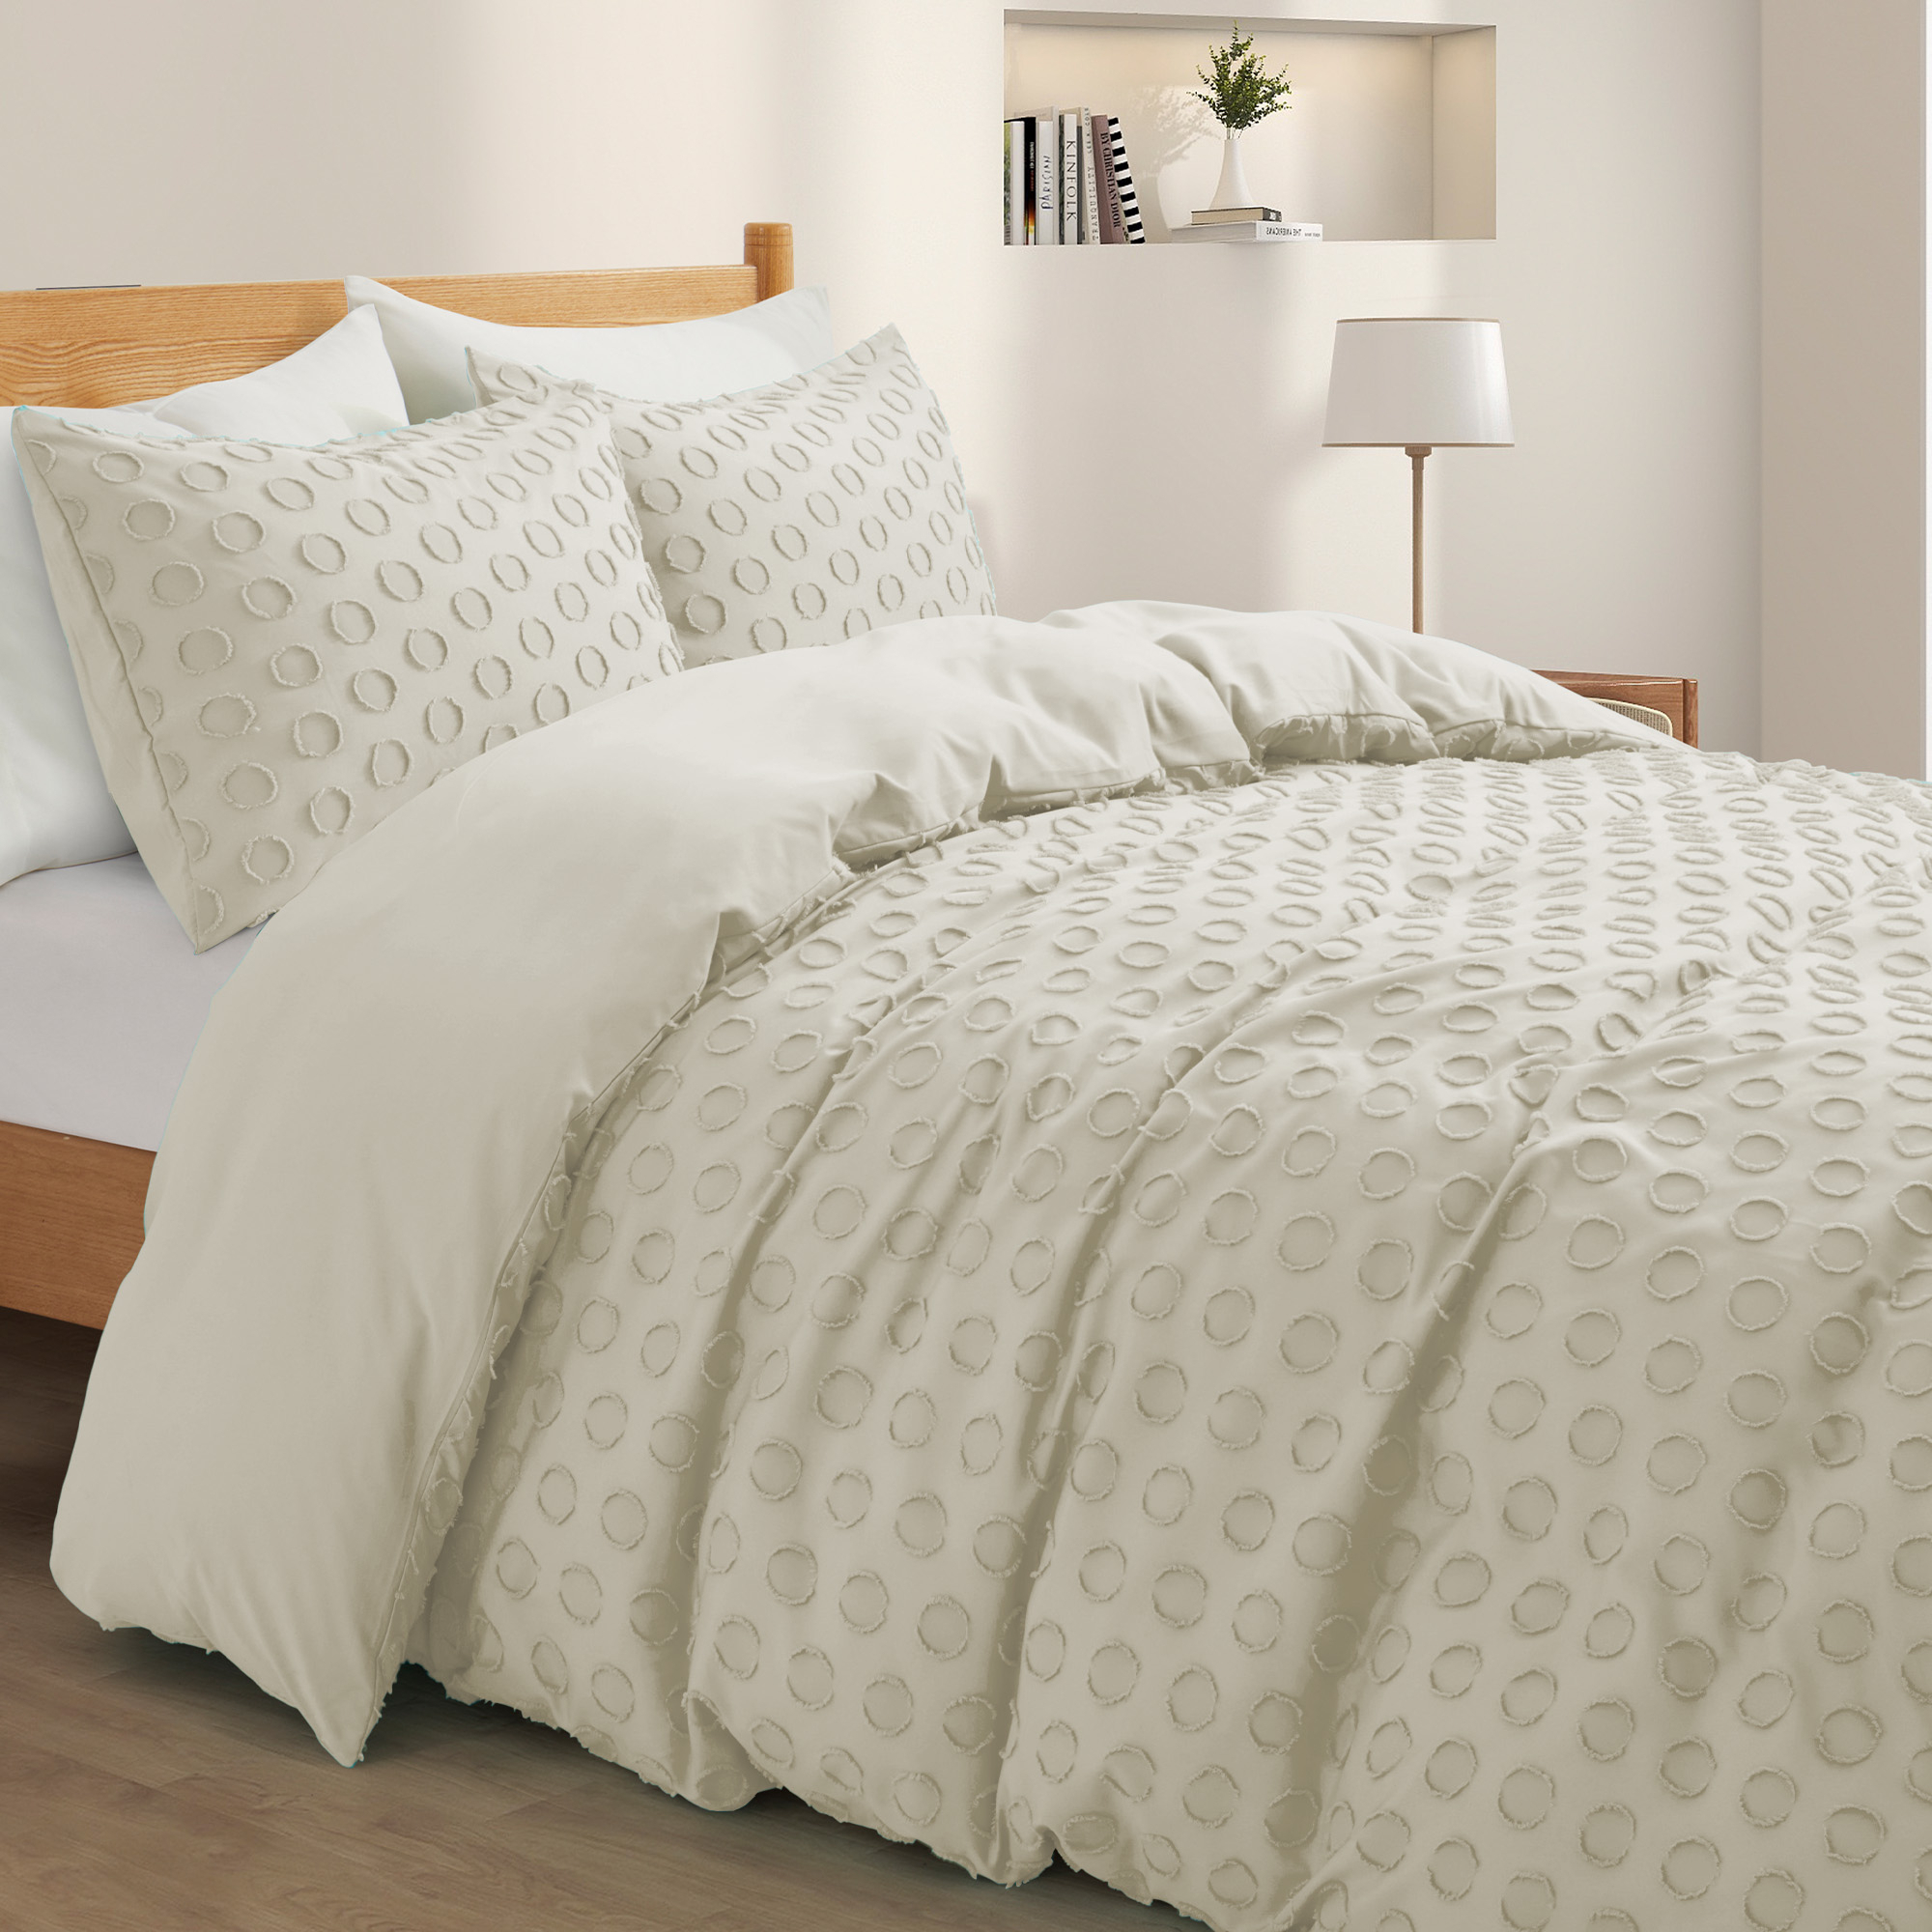 Luxury Bedding Soft Microfiber Duvet Cover And Sham Set - Teal, Twin